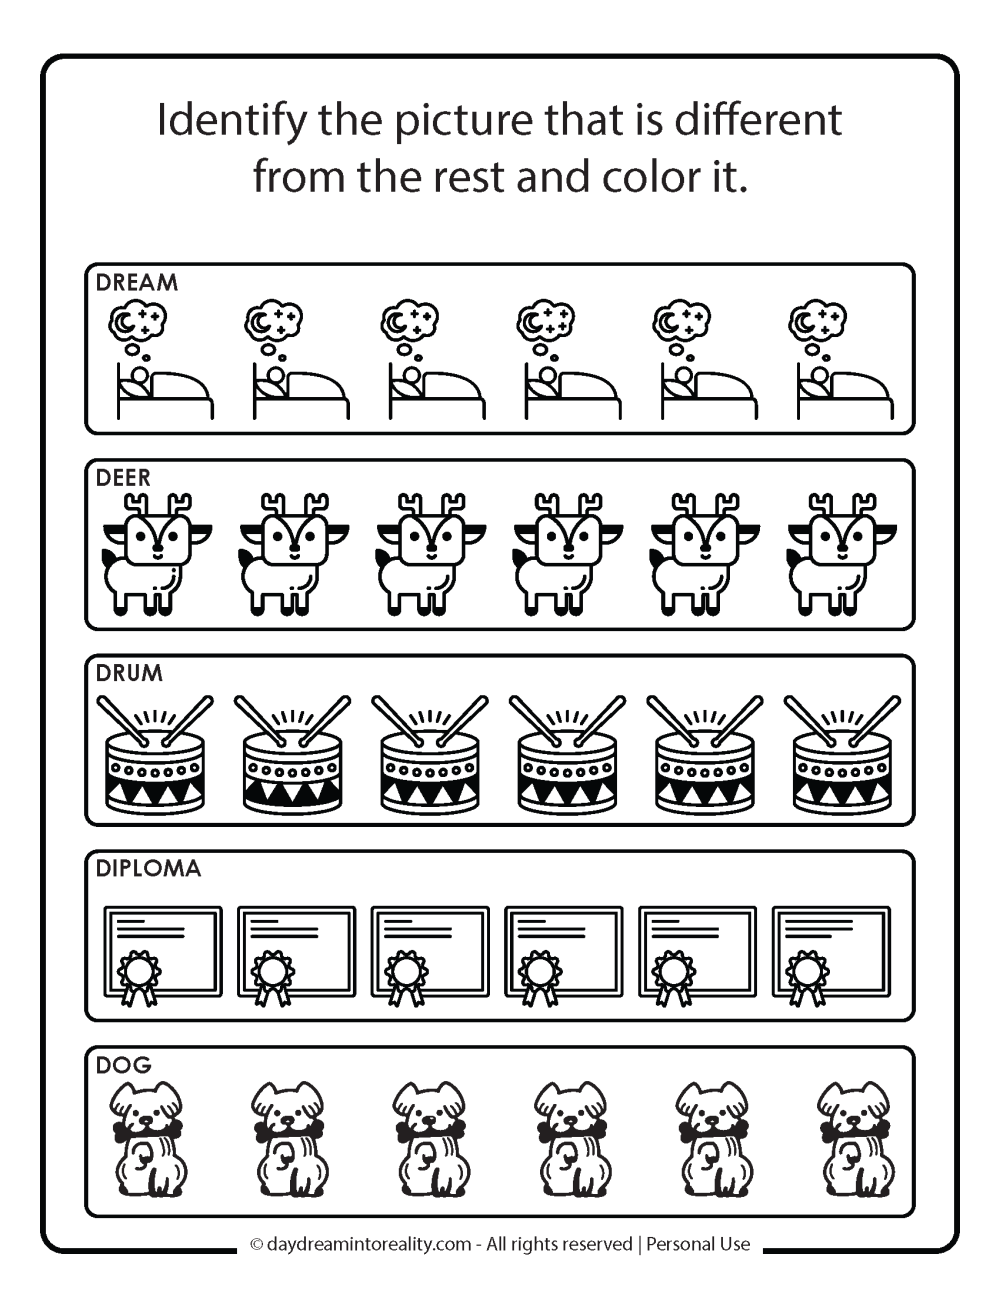 Letter D worksheet free printables. Identify the different picture.